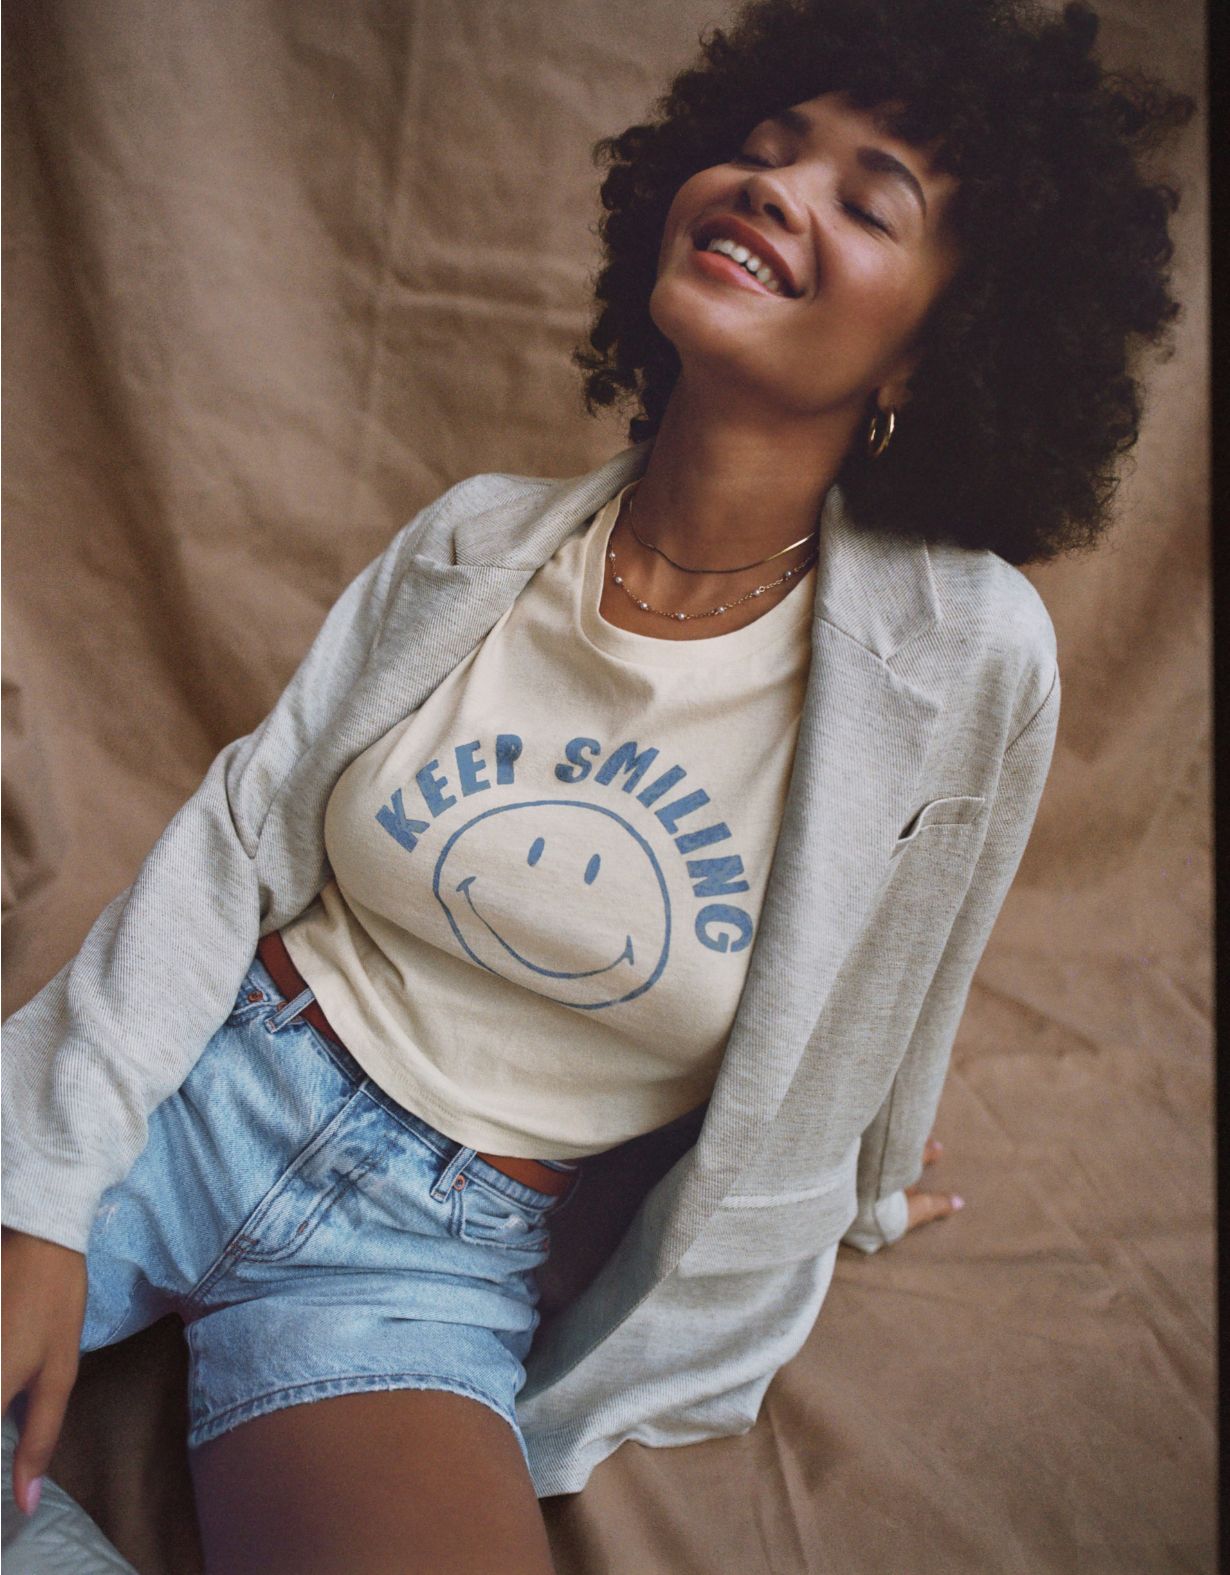 AE Cropped Smiley Graphic T-Shirt